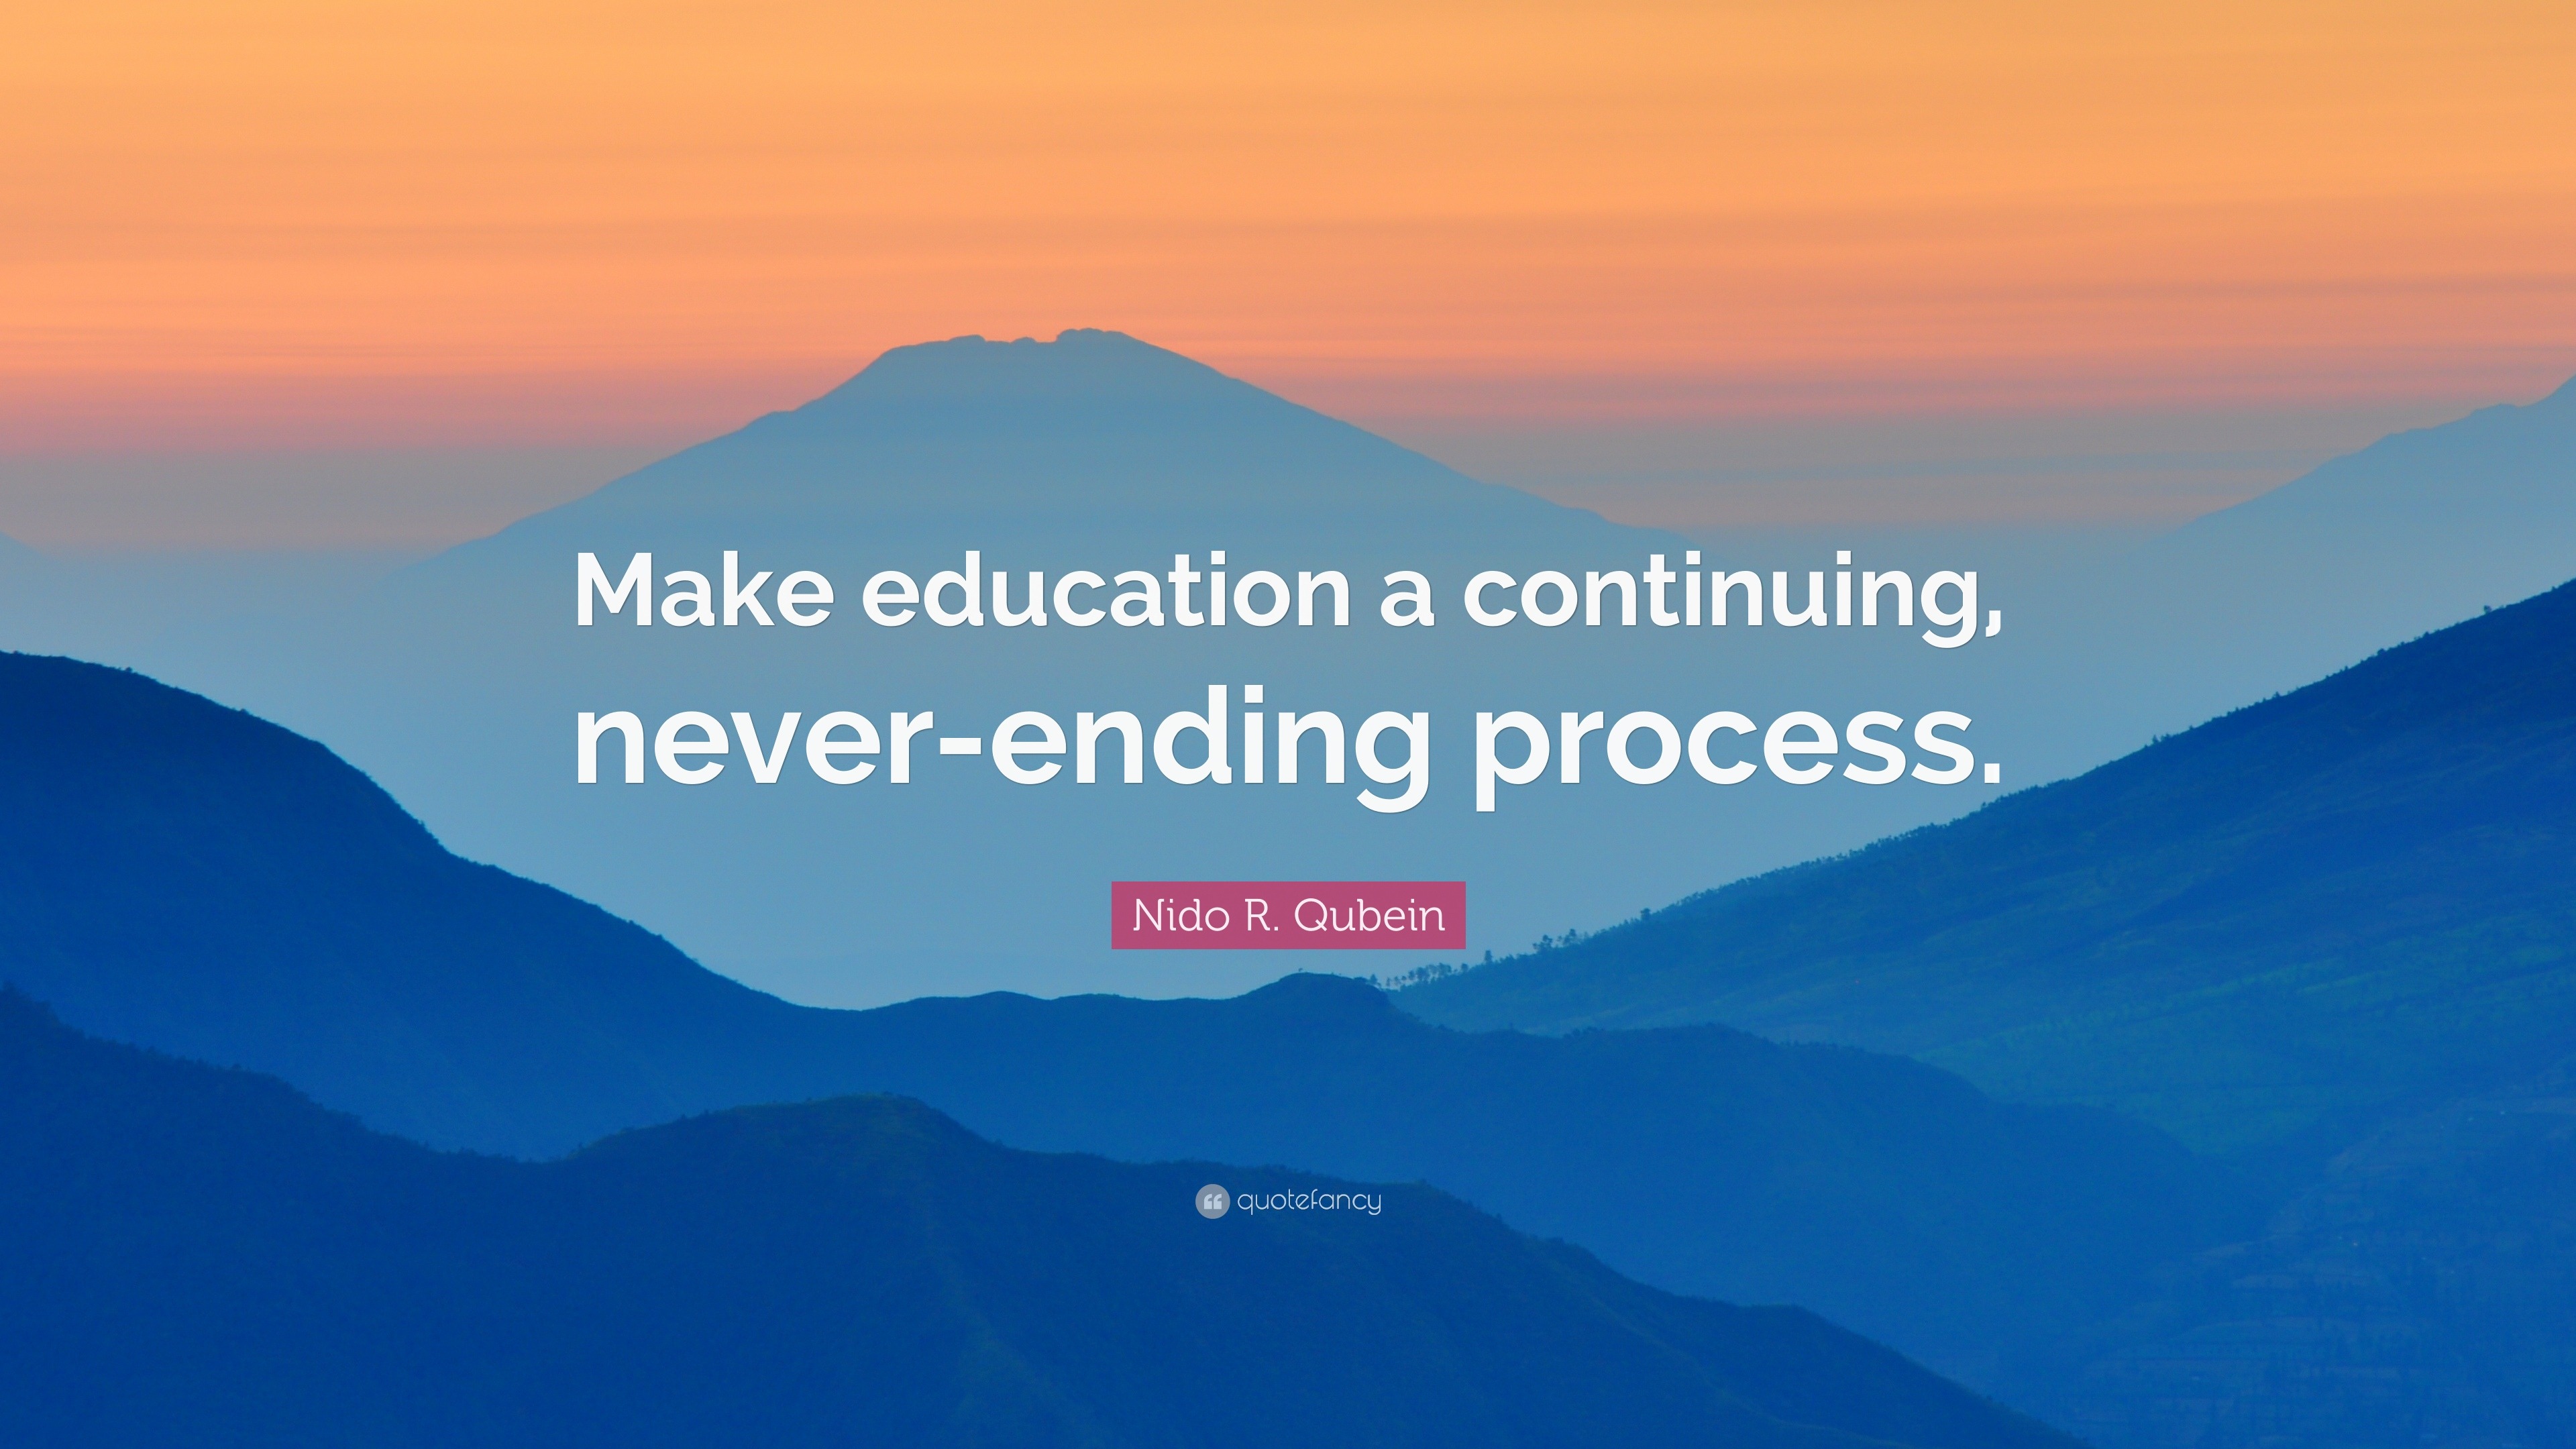 education is a long process that not only